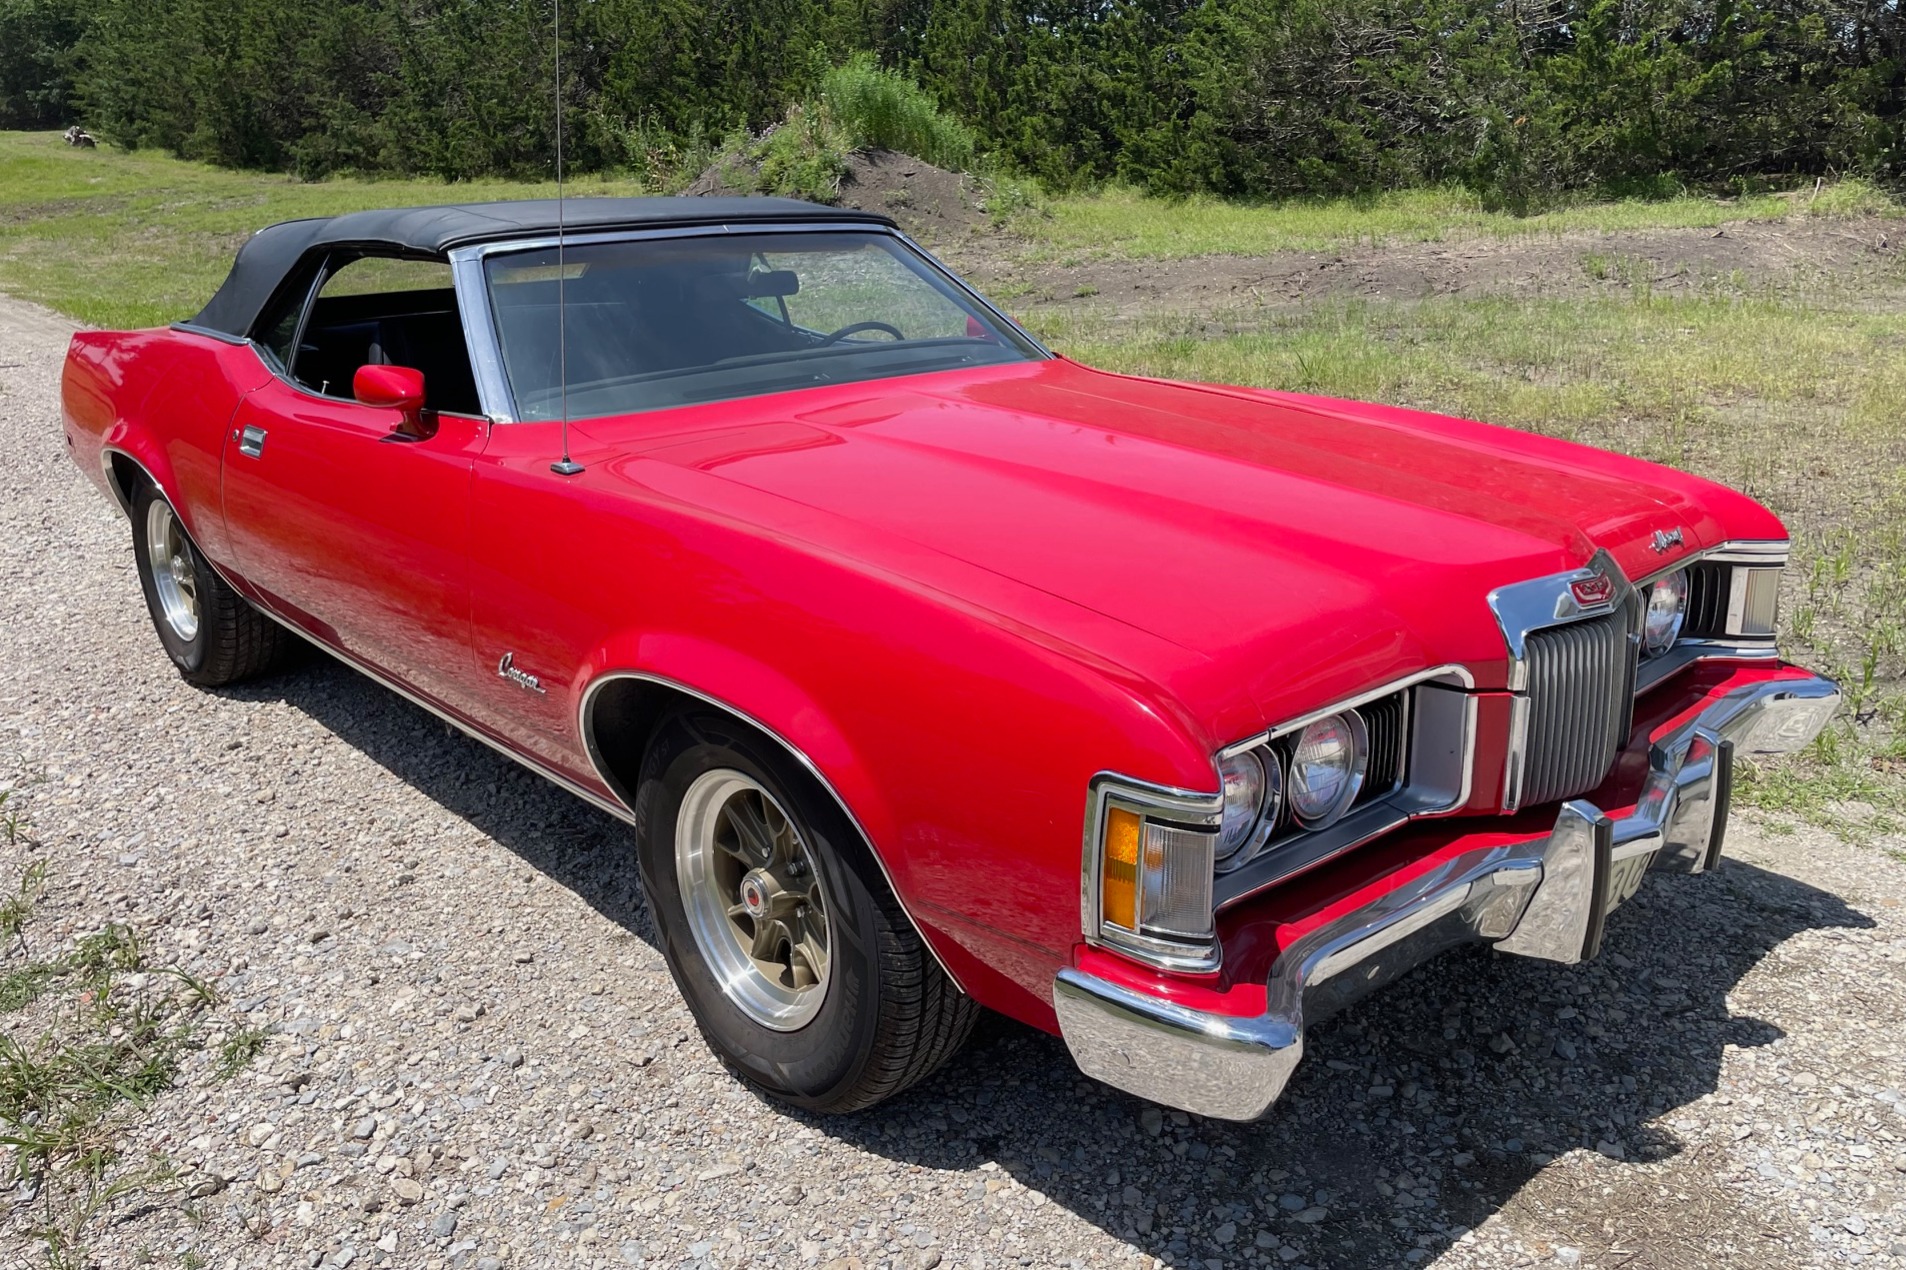 Used 1973 Mercury Cougar XR-7 Convertible Review